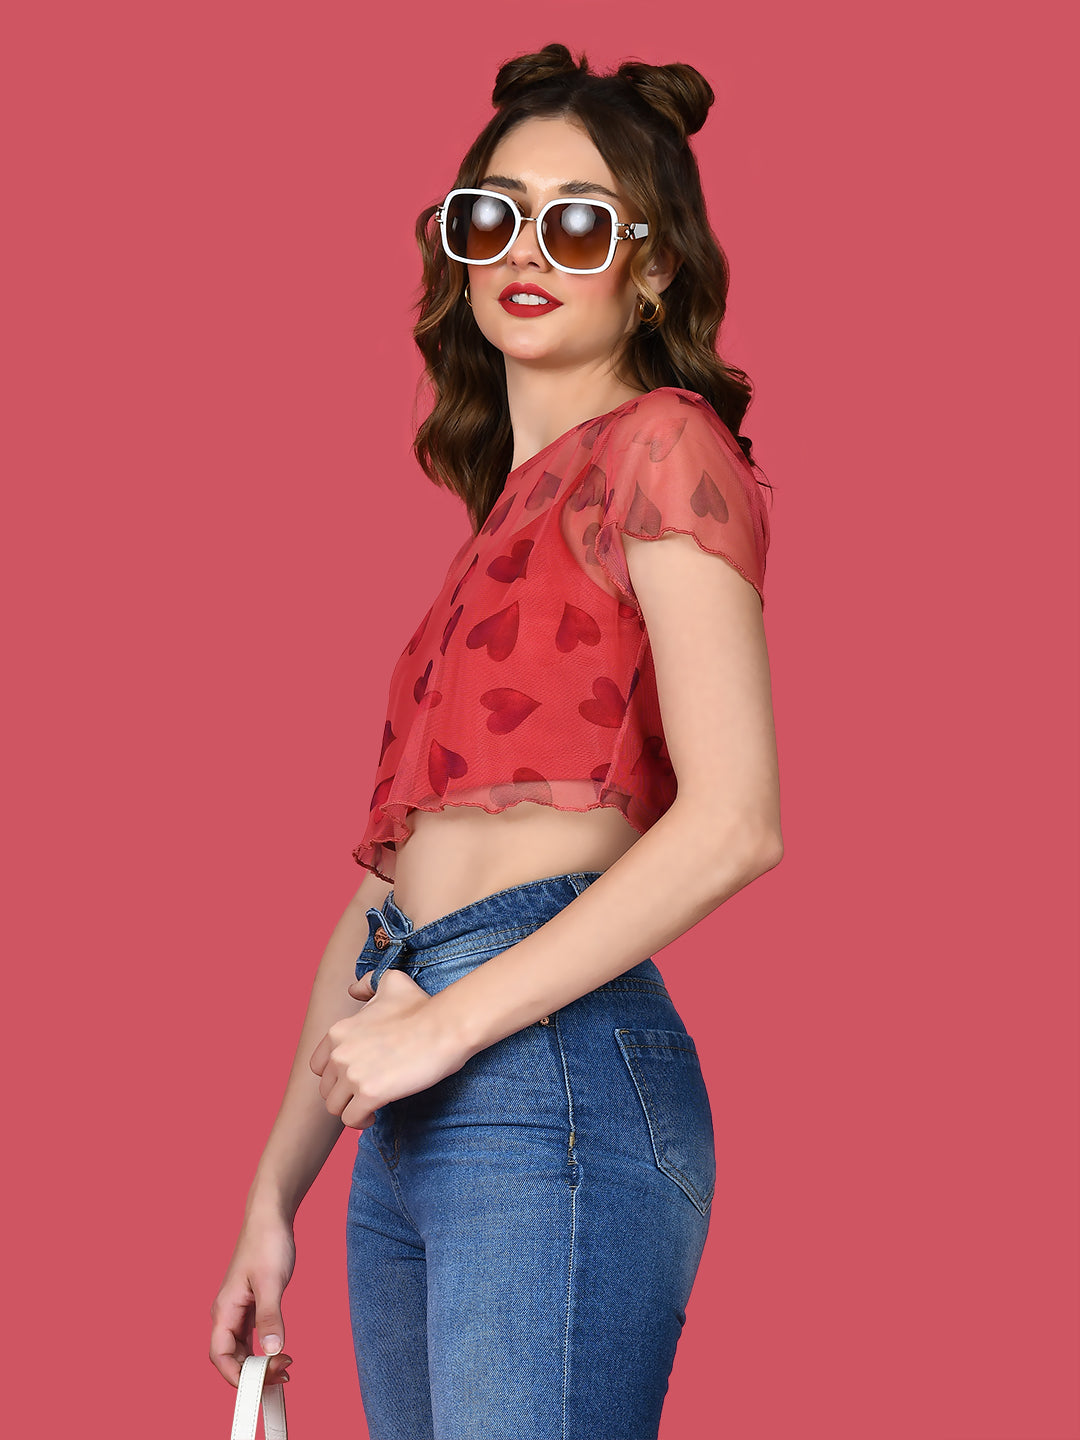 Red Printed Crop Top For Women